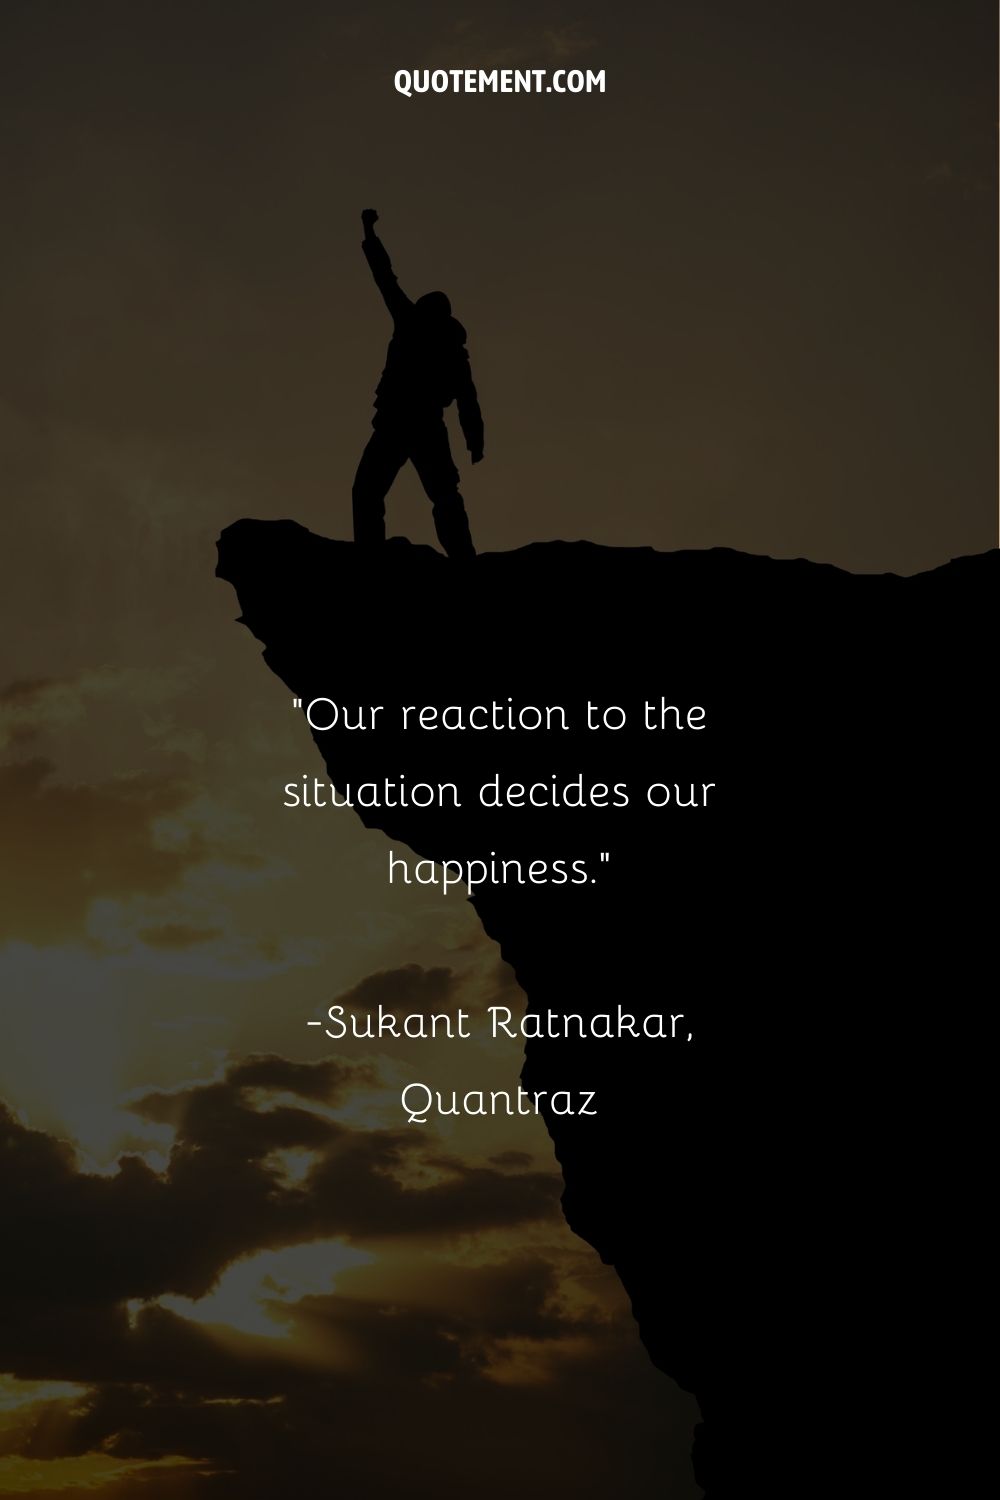 Our reaction to the situation decides our happiness